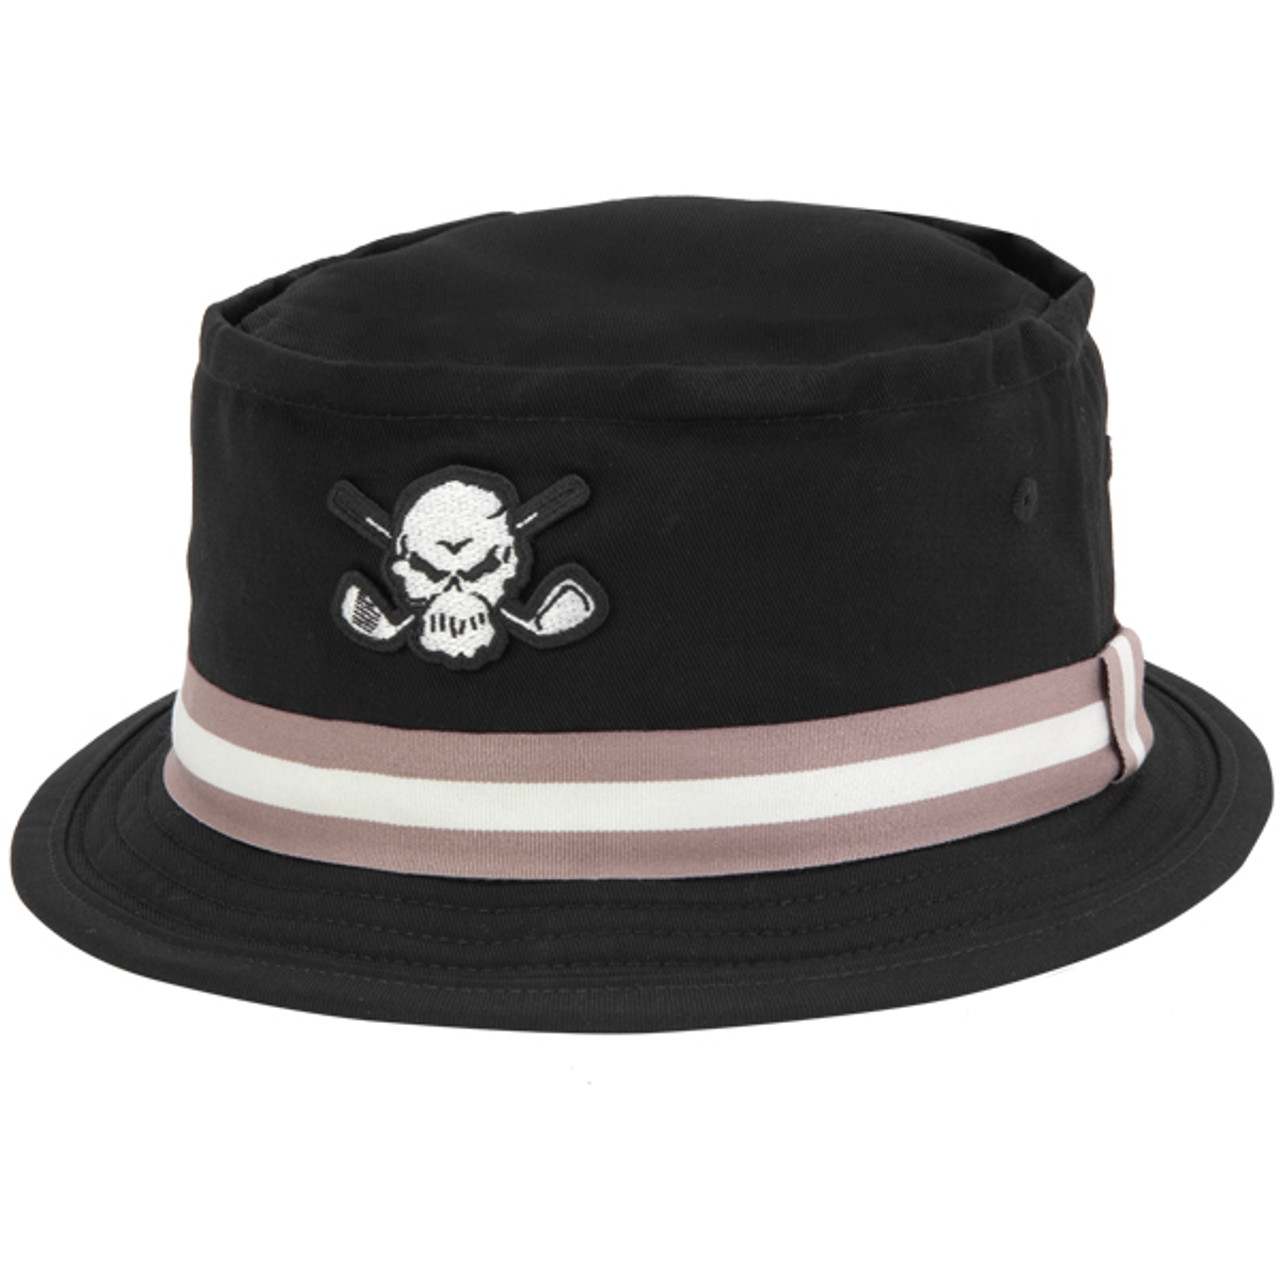 Bucket Hat w/ Skull Design (black). Good protection from the sun's